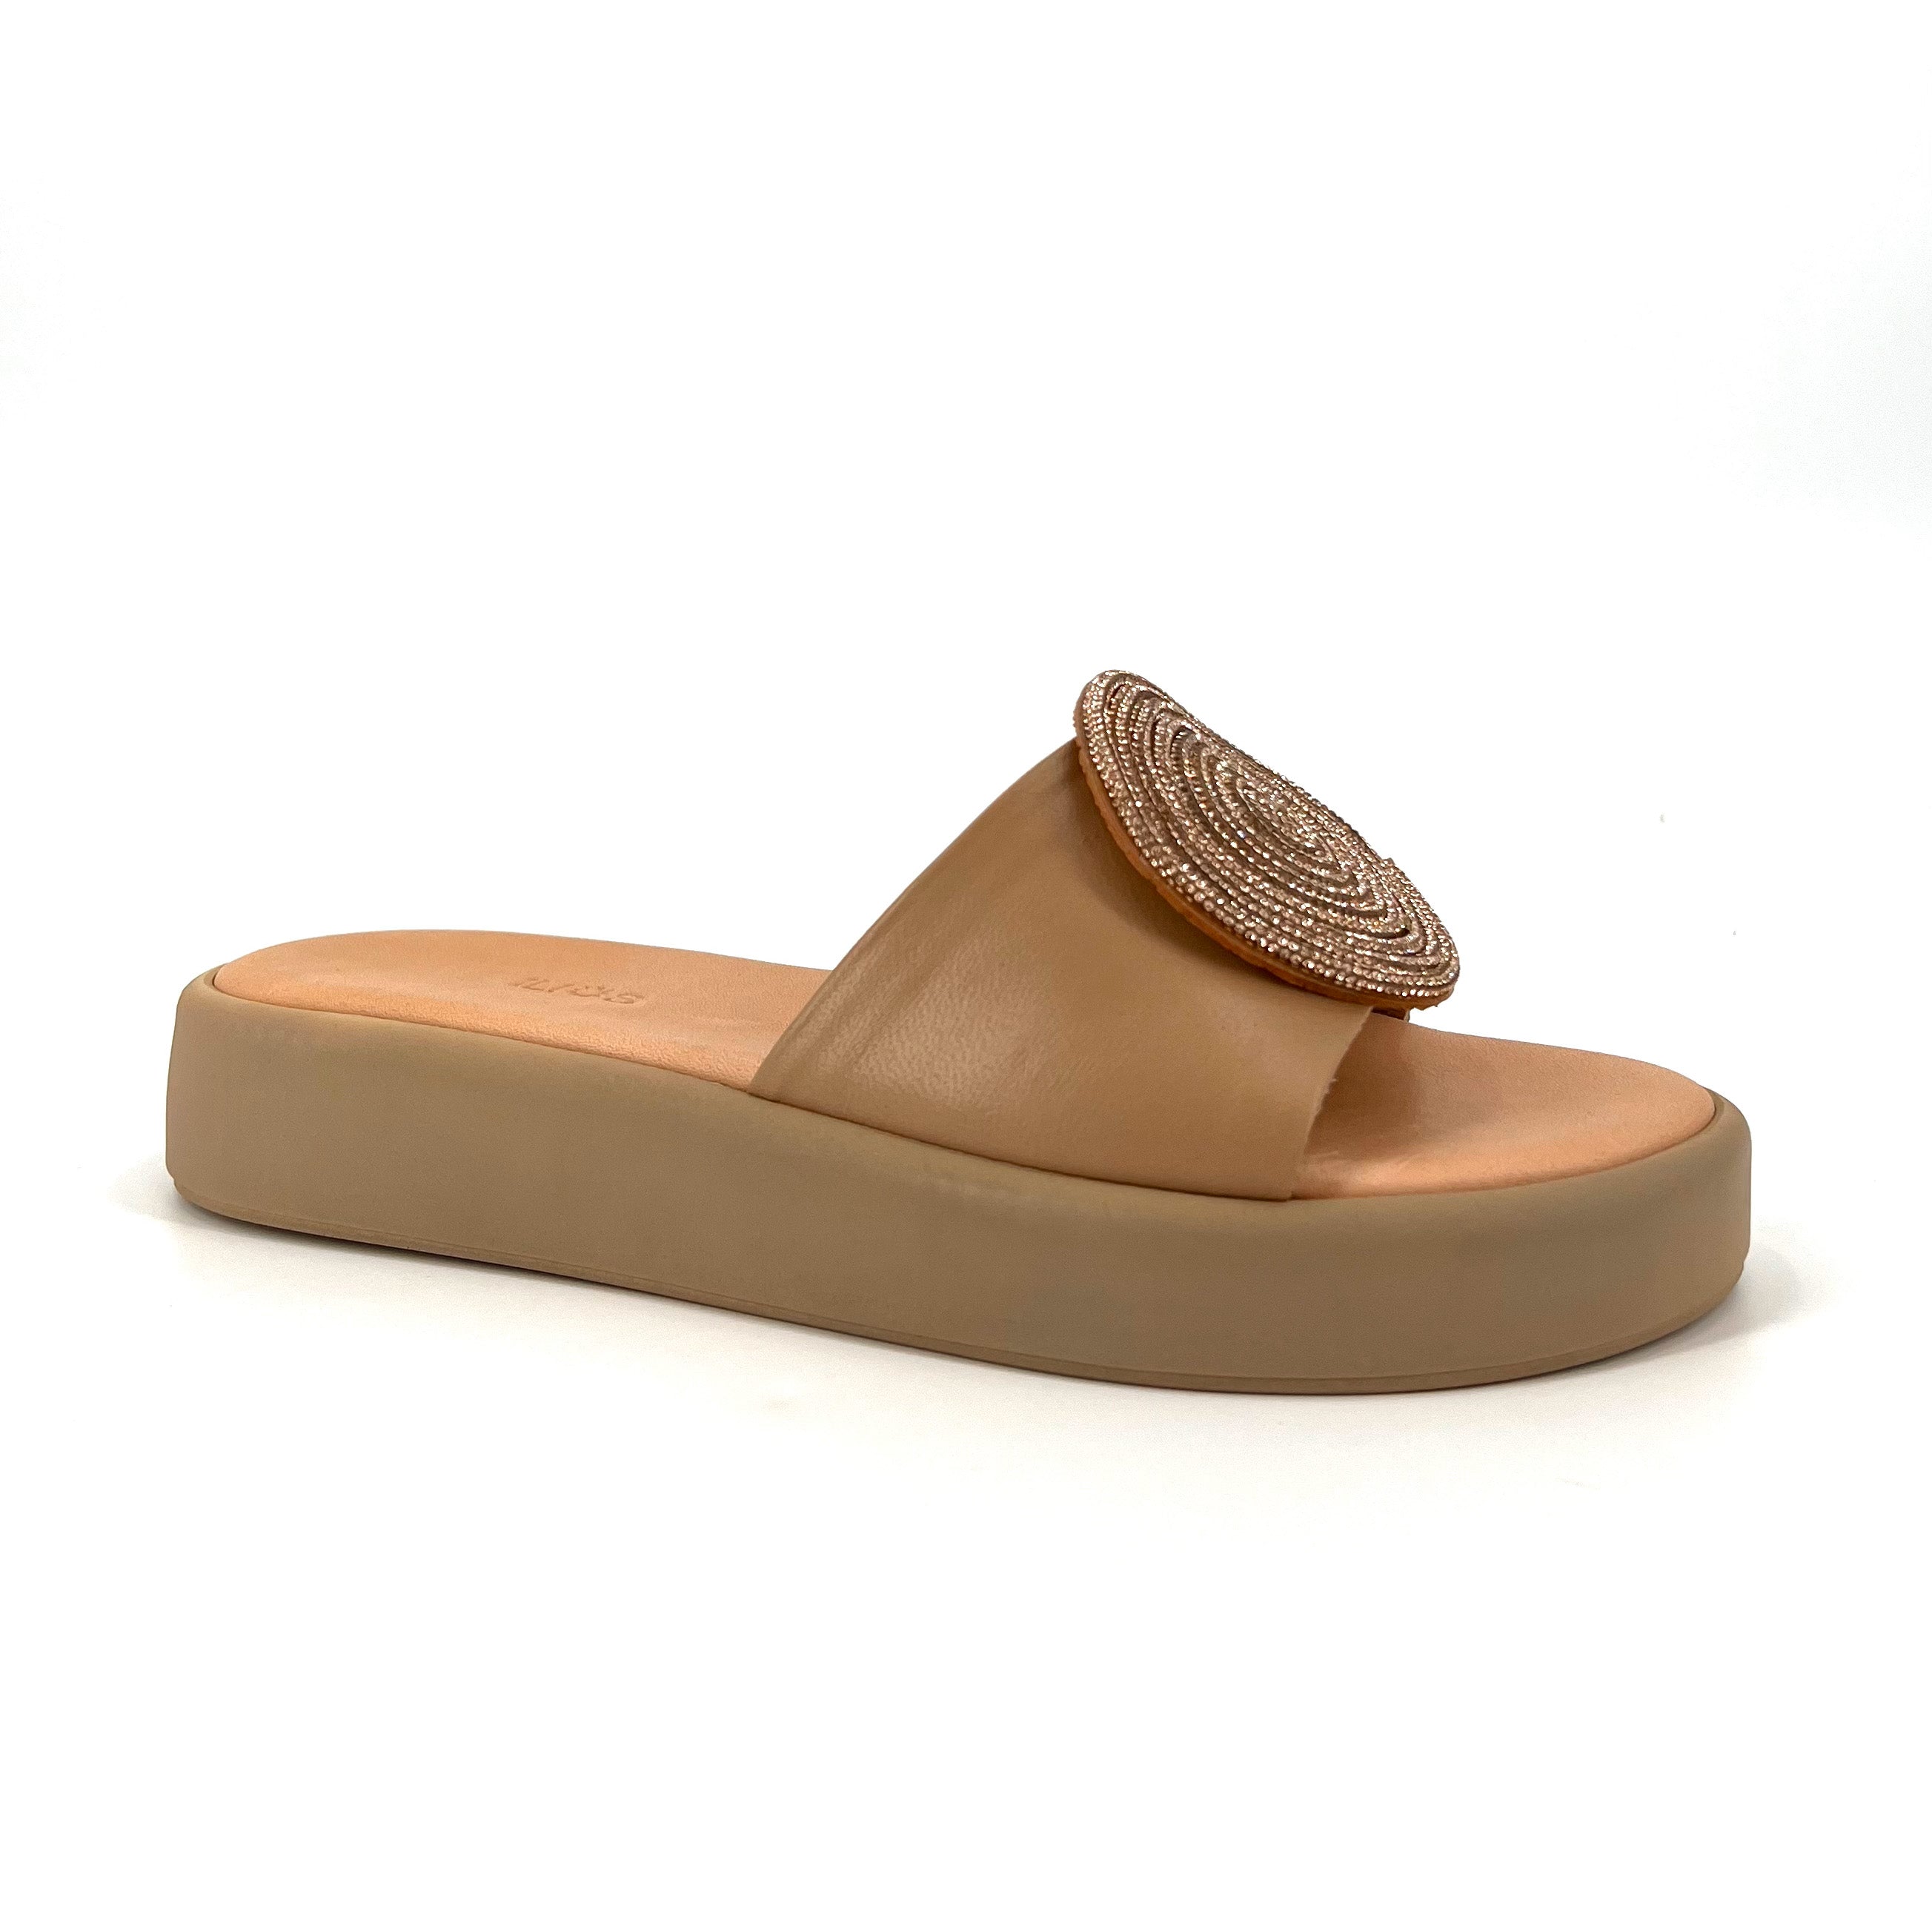 The Pave Circle Comfort Slide in Biscotto